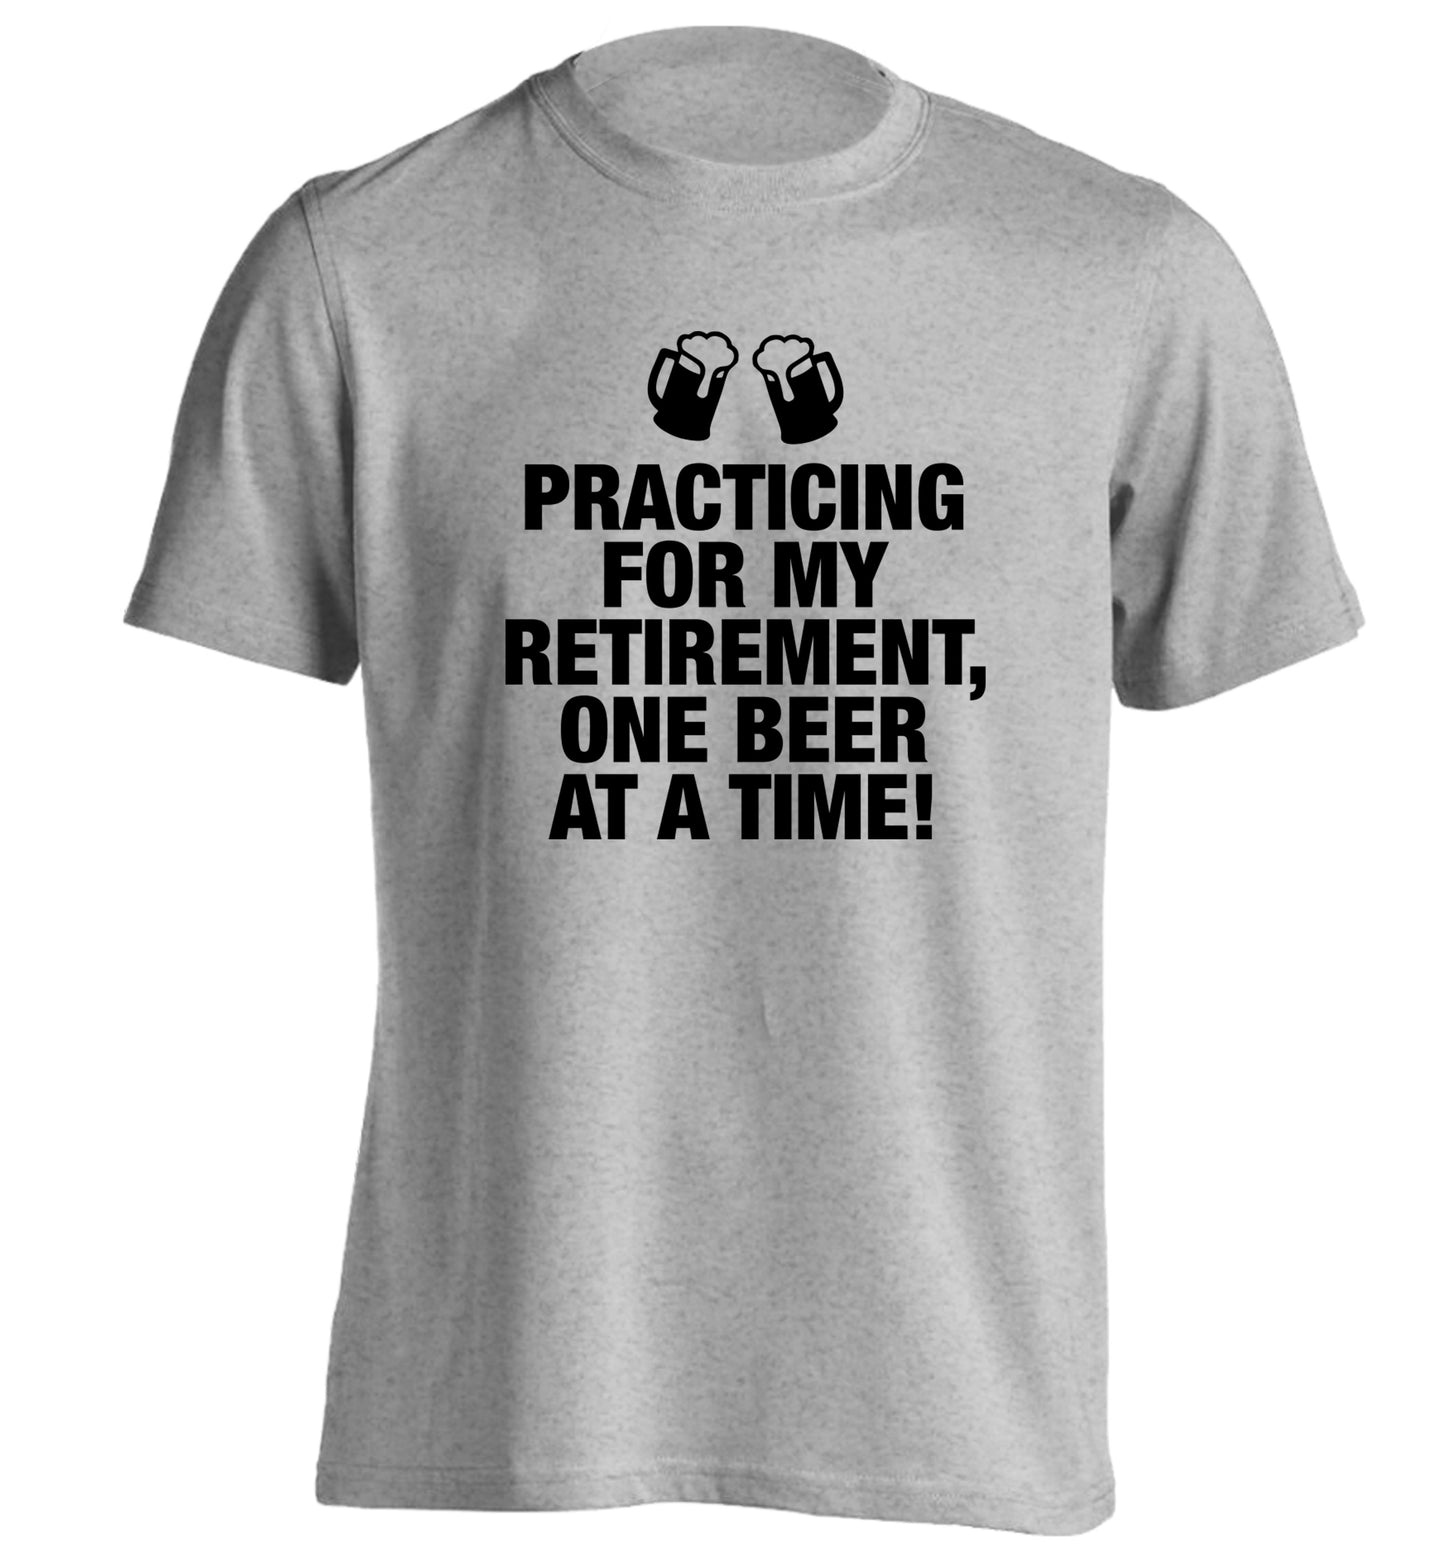 Practicing my retirement one beer at a time adults unisex grey Tshirt 2XL